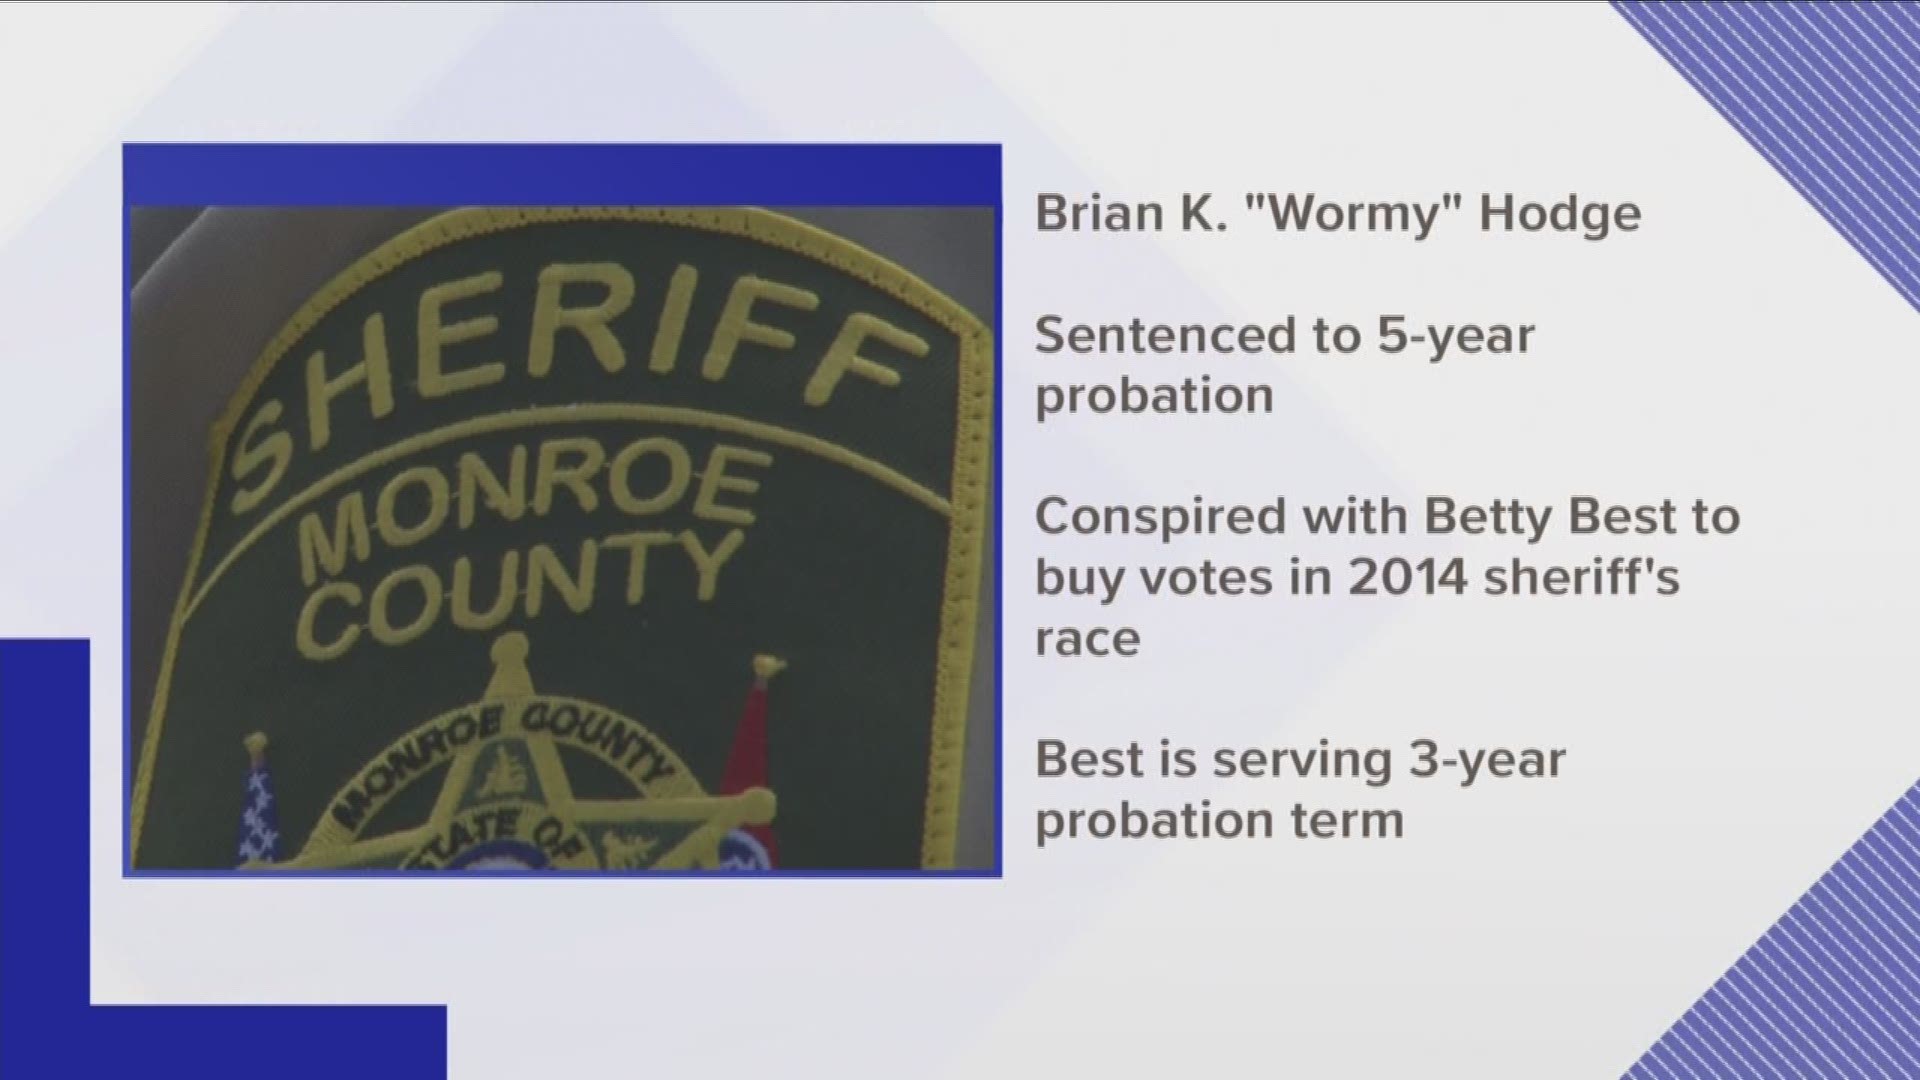 A Monroe County man will serve a 5-year probation for his role in a 2014 vote-buying scheme.